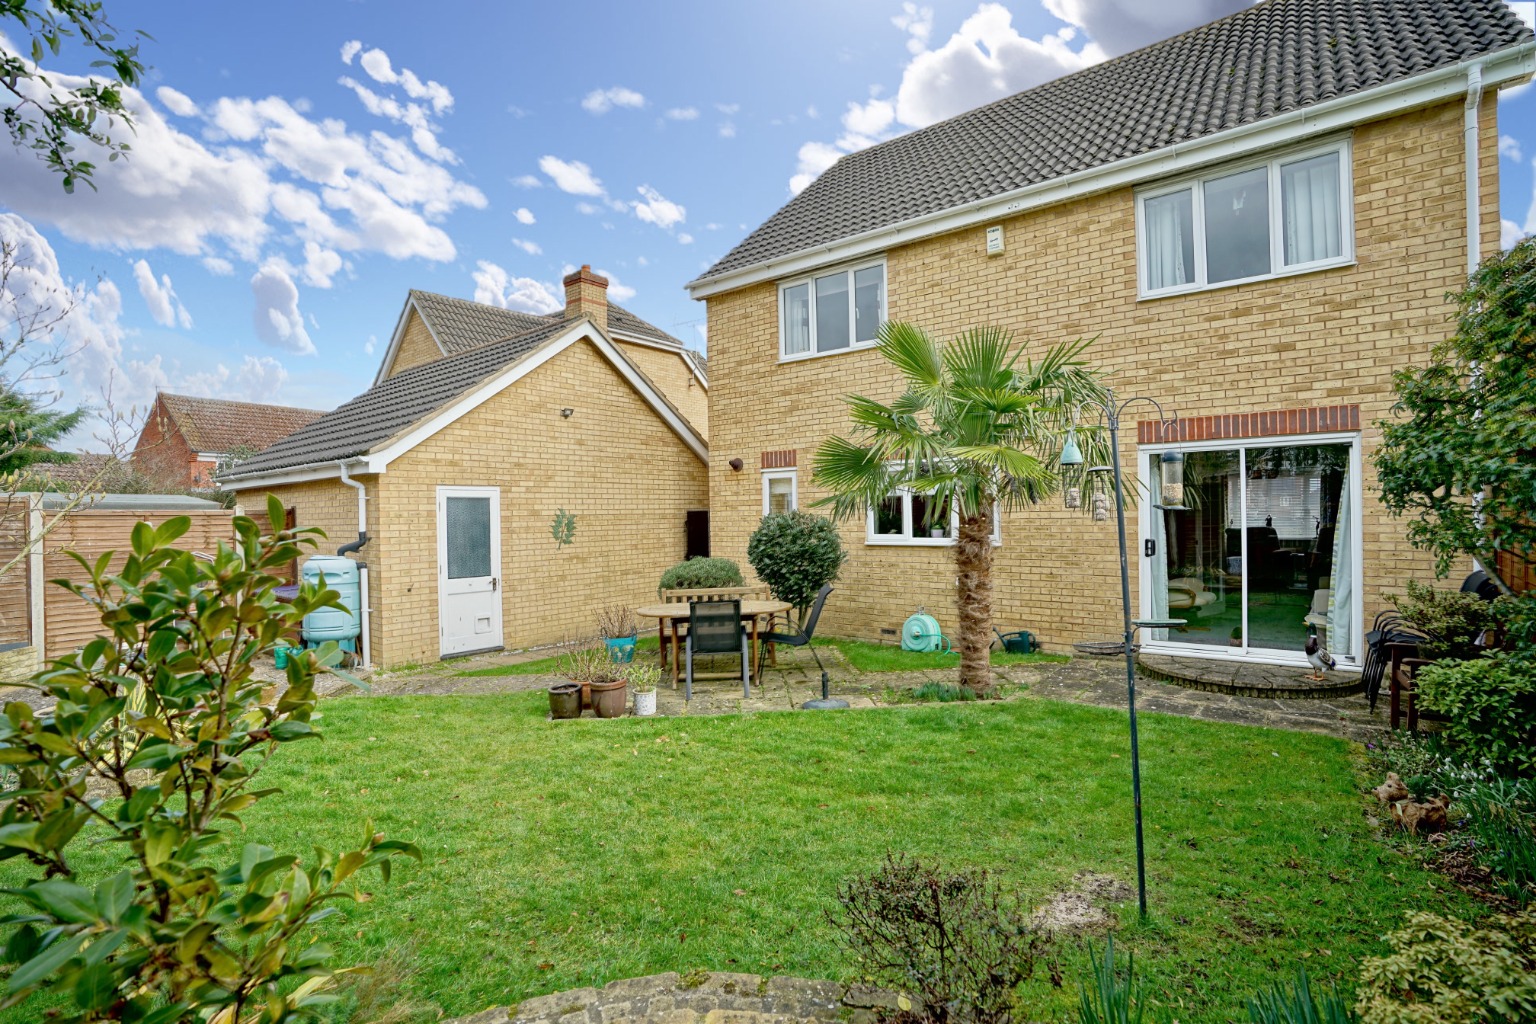 4 bed detached house for sale in Cambridge Drive, St Ives - Property Image 1